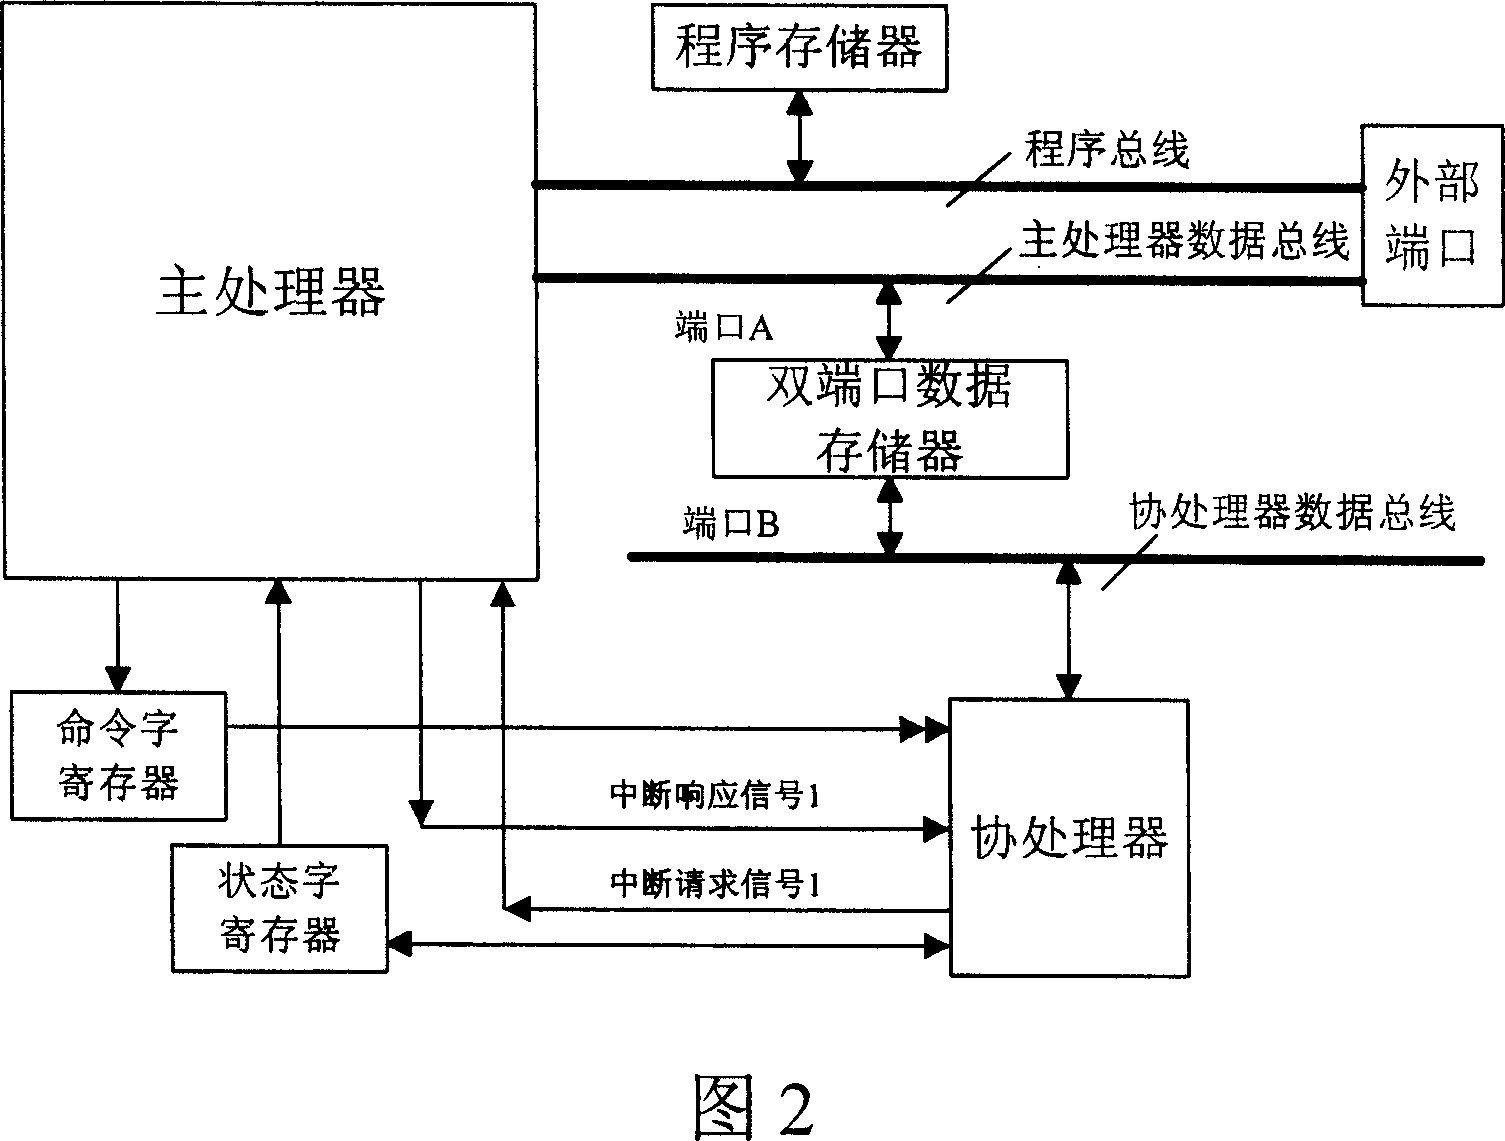 System and method for realizing interconnect between main processor and coprocessor interface